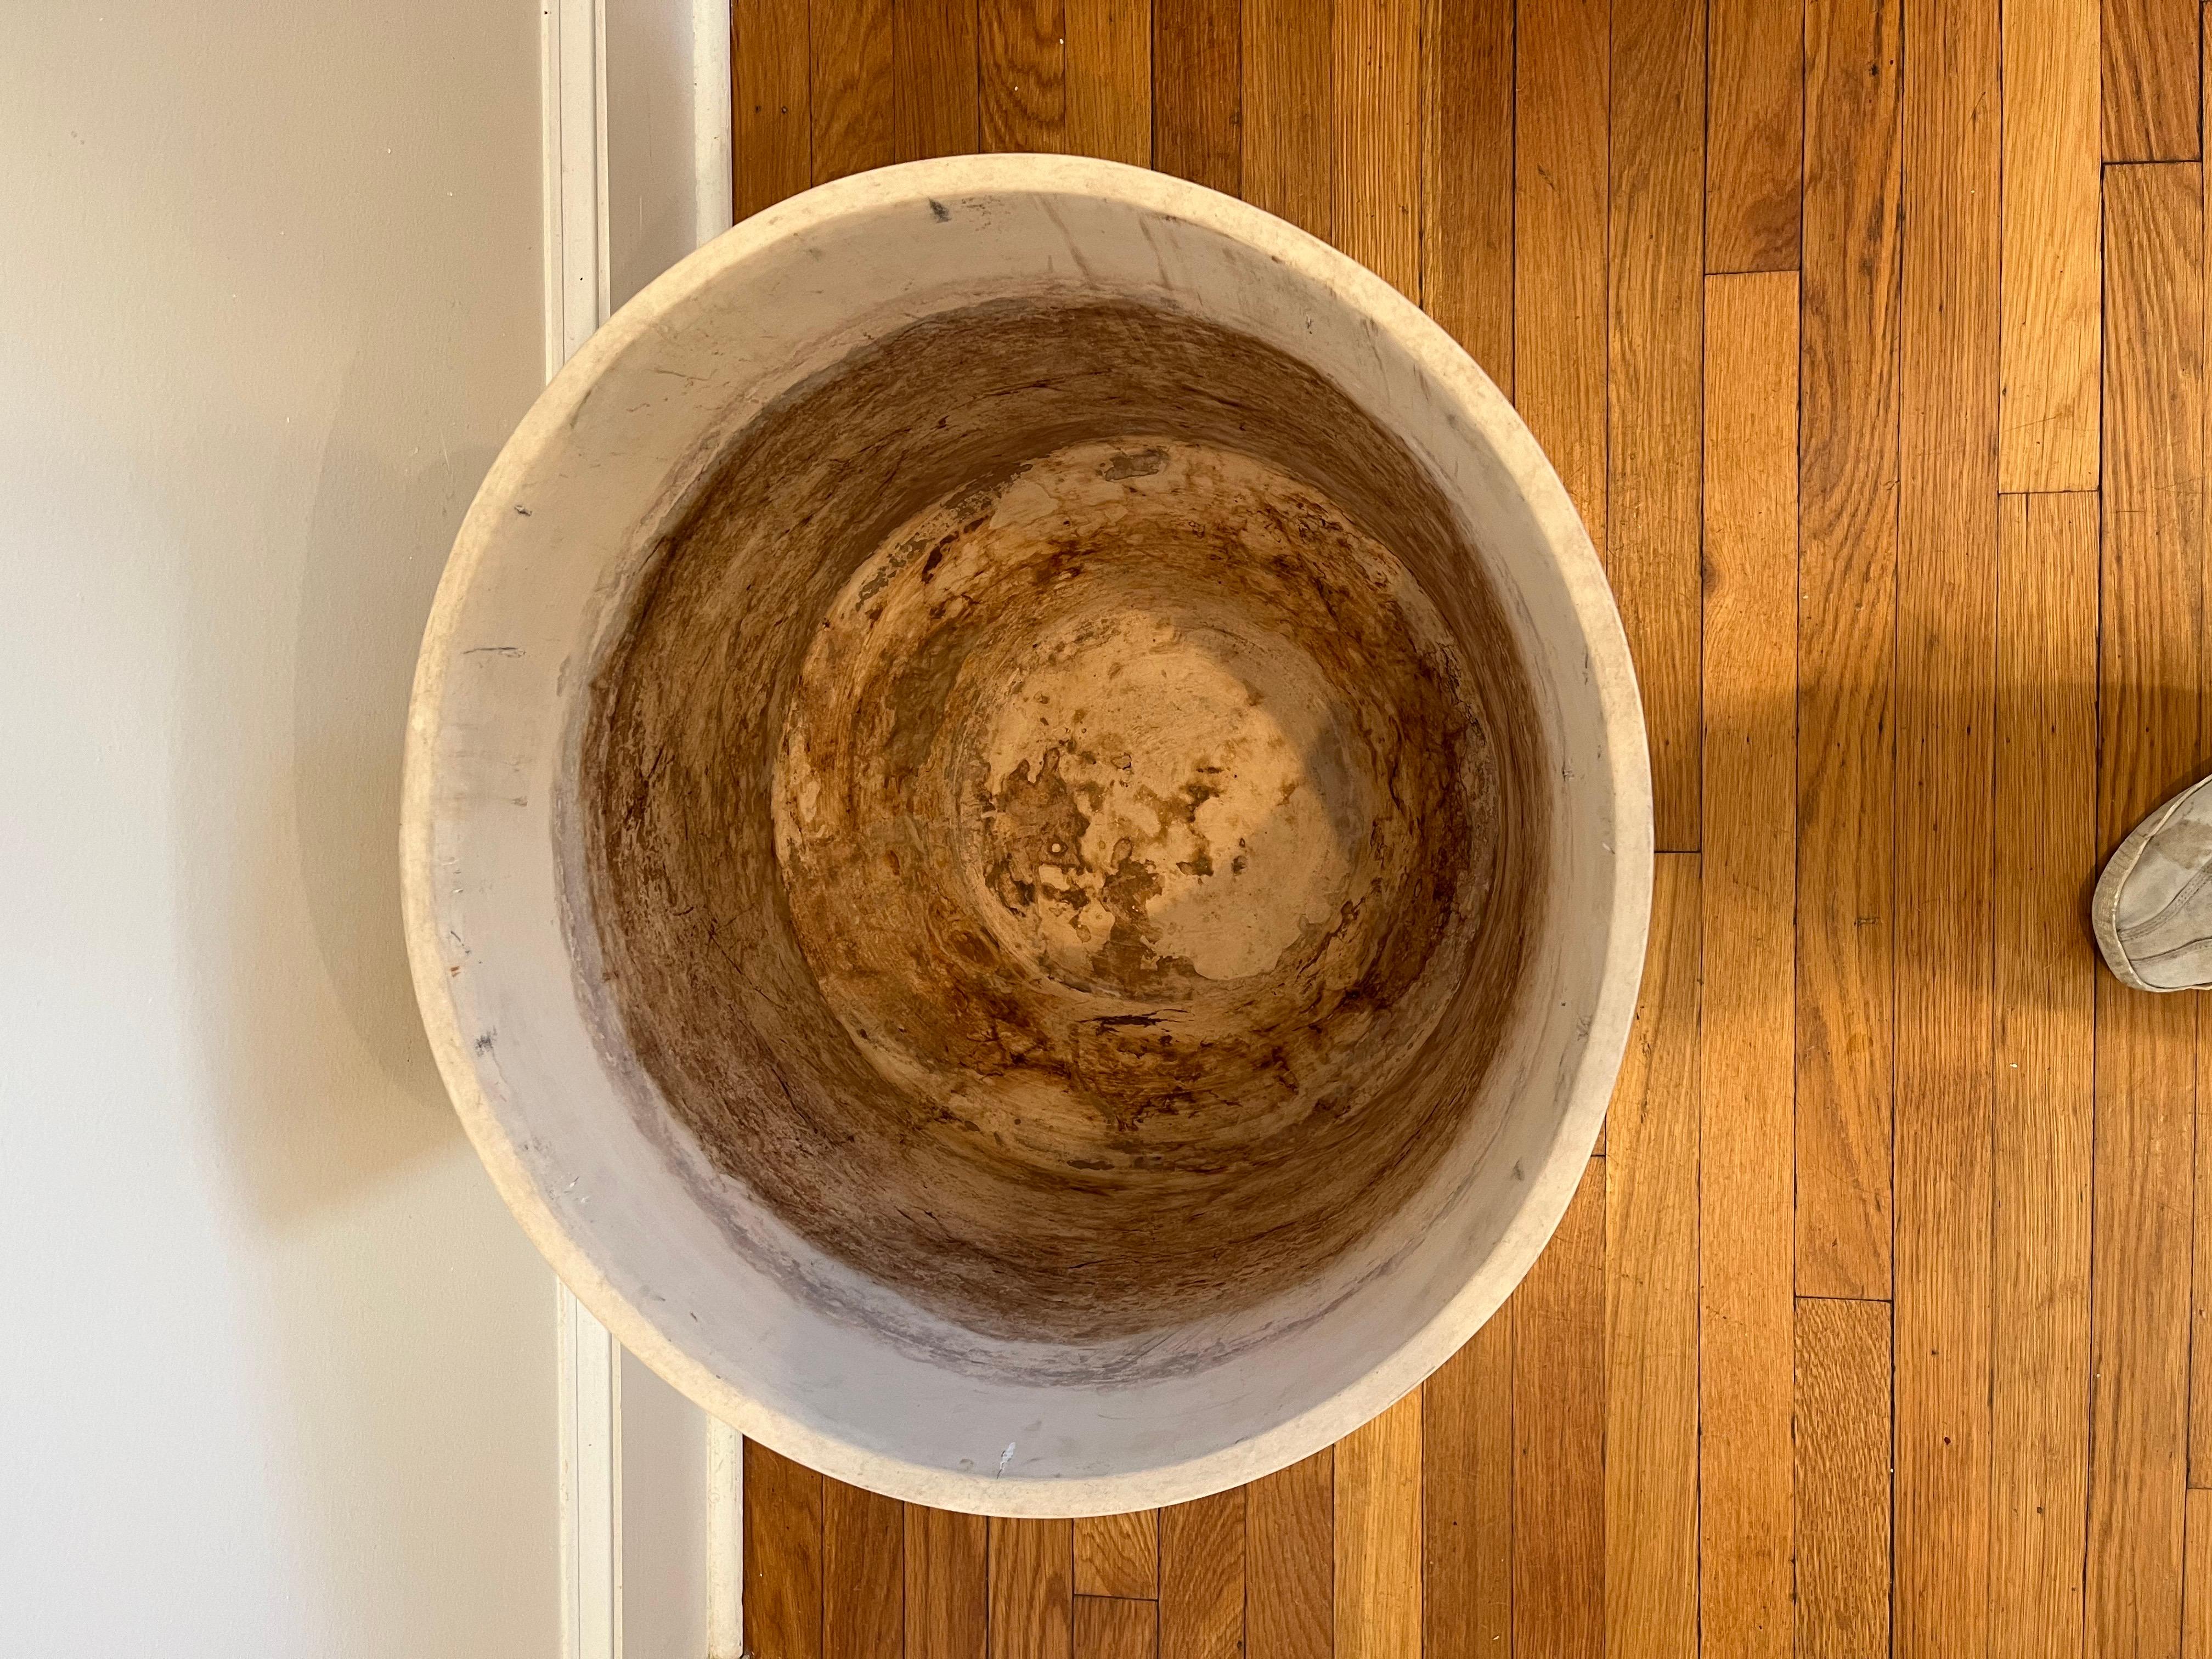 Large planter designed by Malcolm Leland for the Southern California company Architectural Pottery circa 1950s. The bisque finish was designed to let the water evaporate when the planter was used indoors. Great wedge bottom design is a wonderful